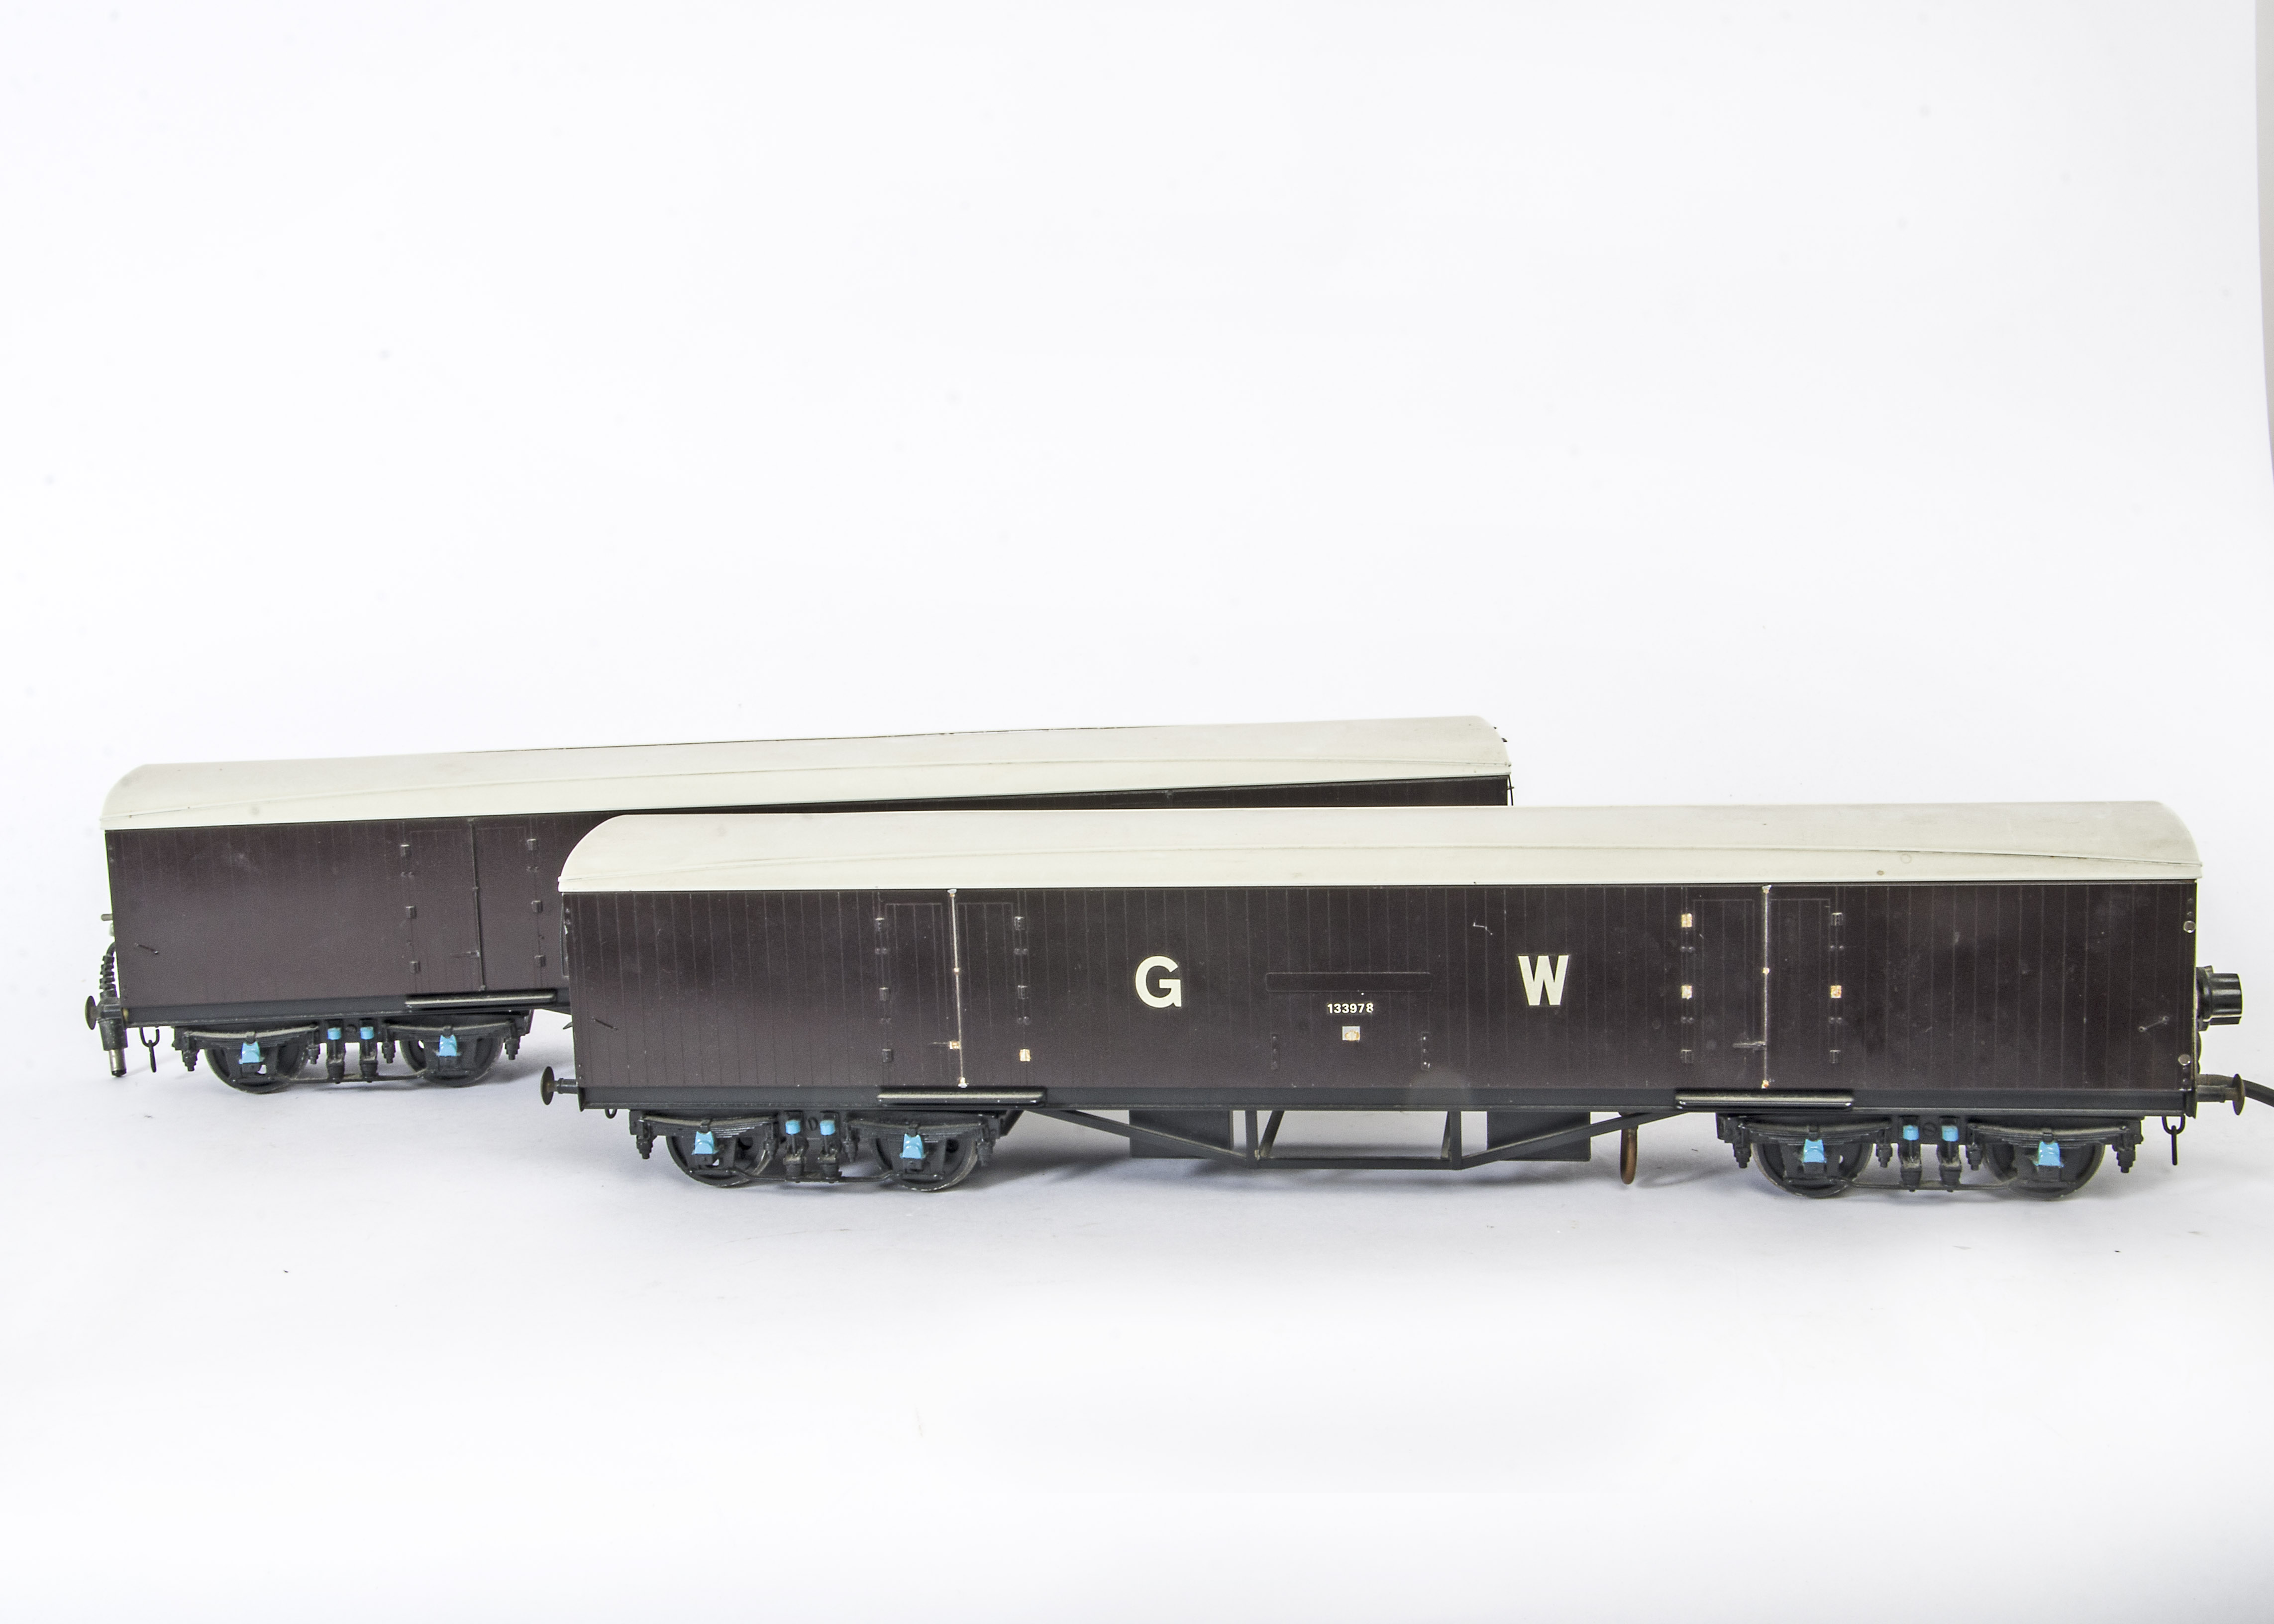 Two Gauge 1 GWR Siphon G Vans by JBC Railway Models of Sheffield, equipped as accessories for live